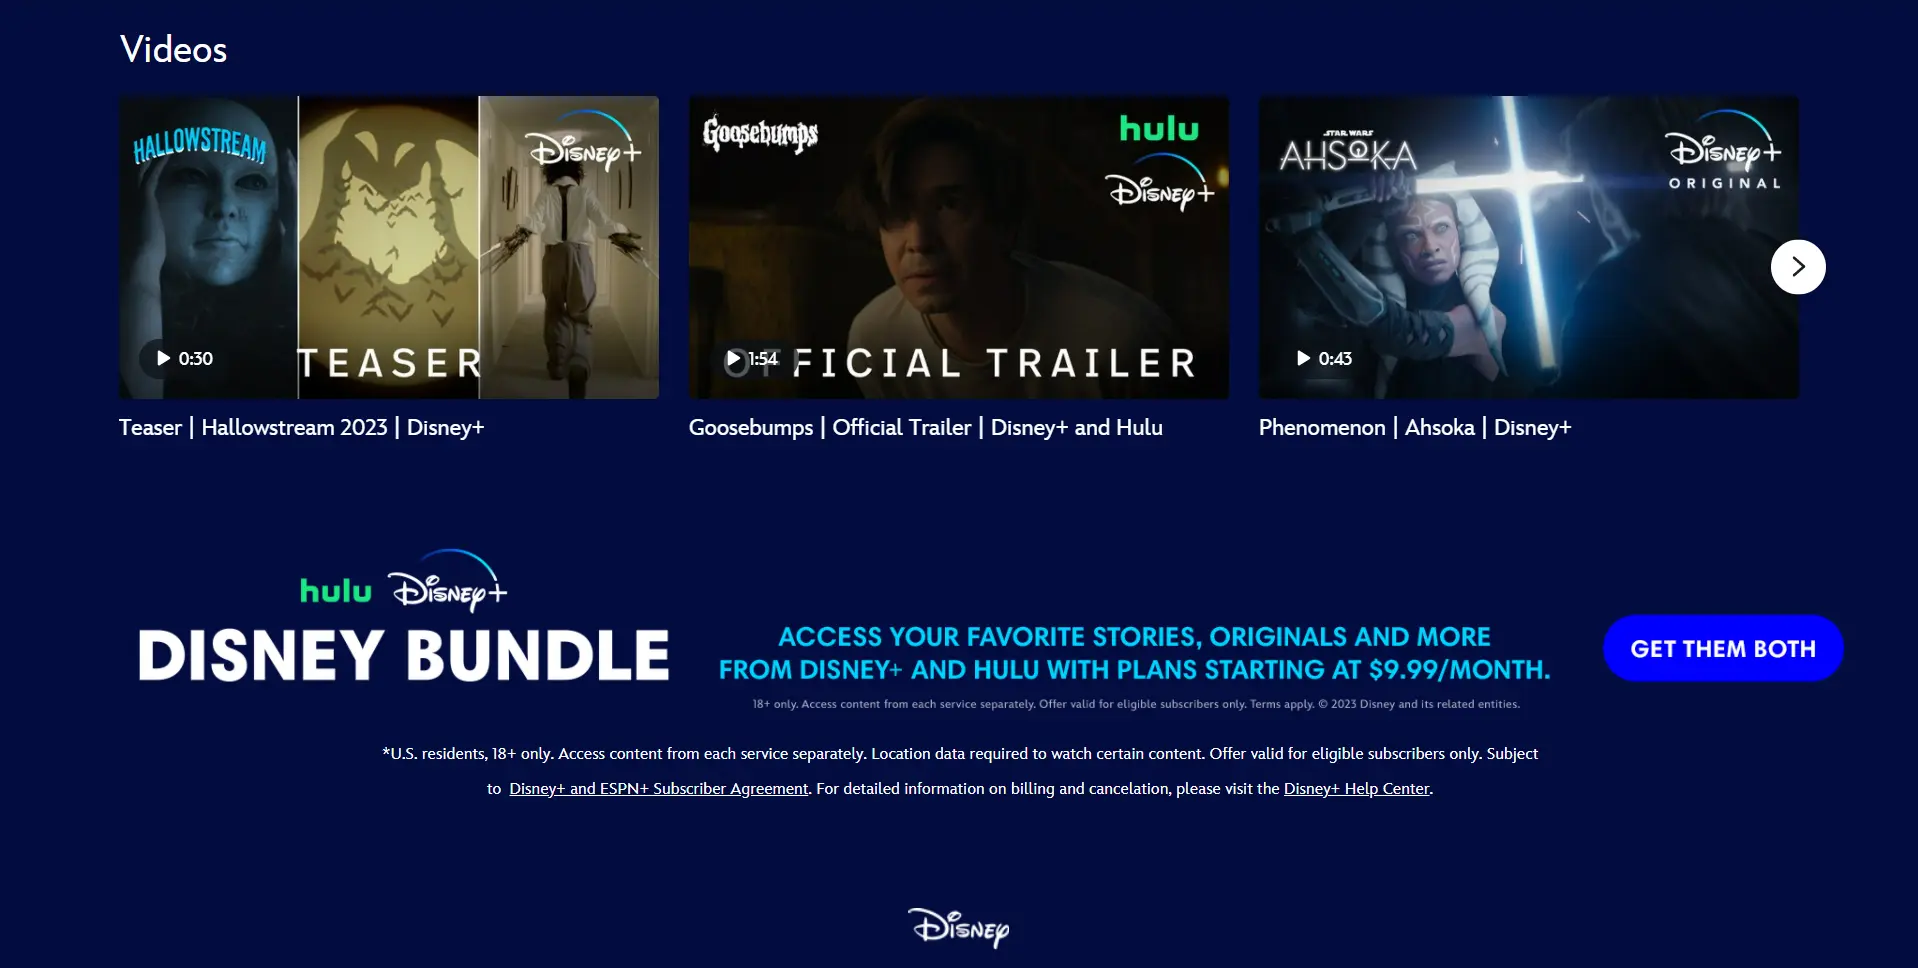 visit disneyplus.com where user will need to sign in and Purchase bundle then visit disneyplus.com login/begin 8 digit code to enter the code